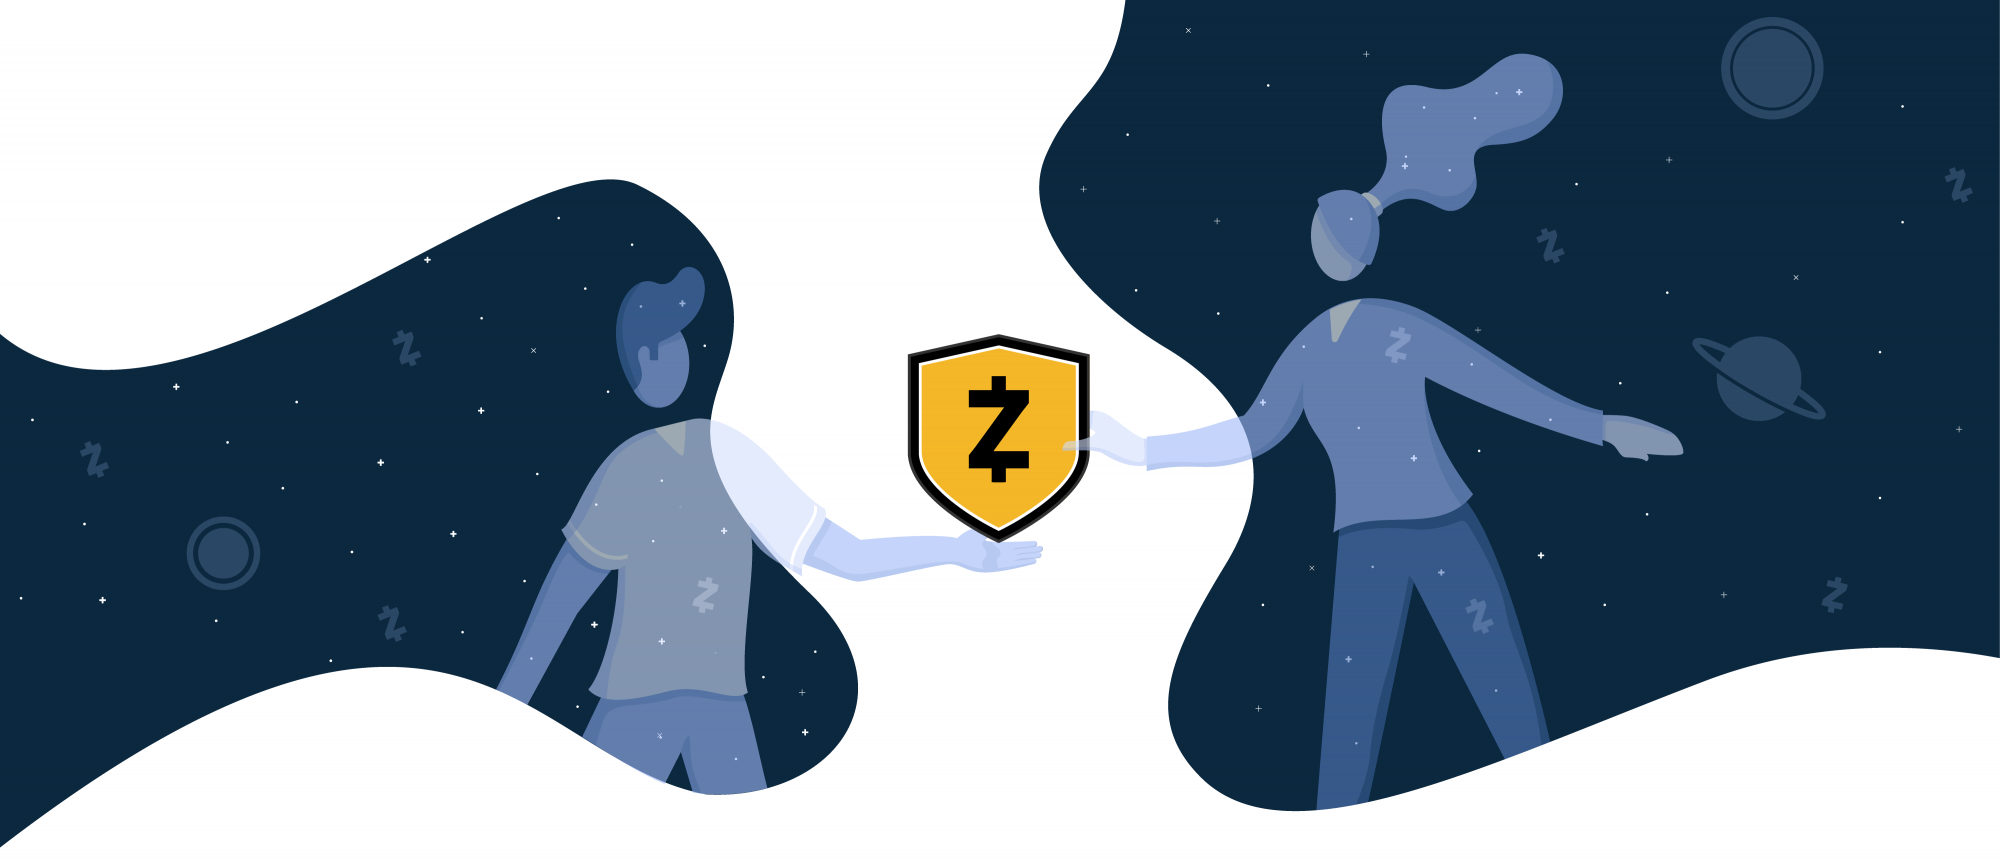 Zcash – it’s like Bitcoin, but private